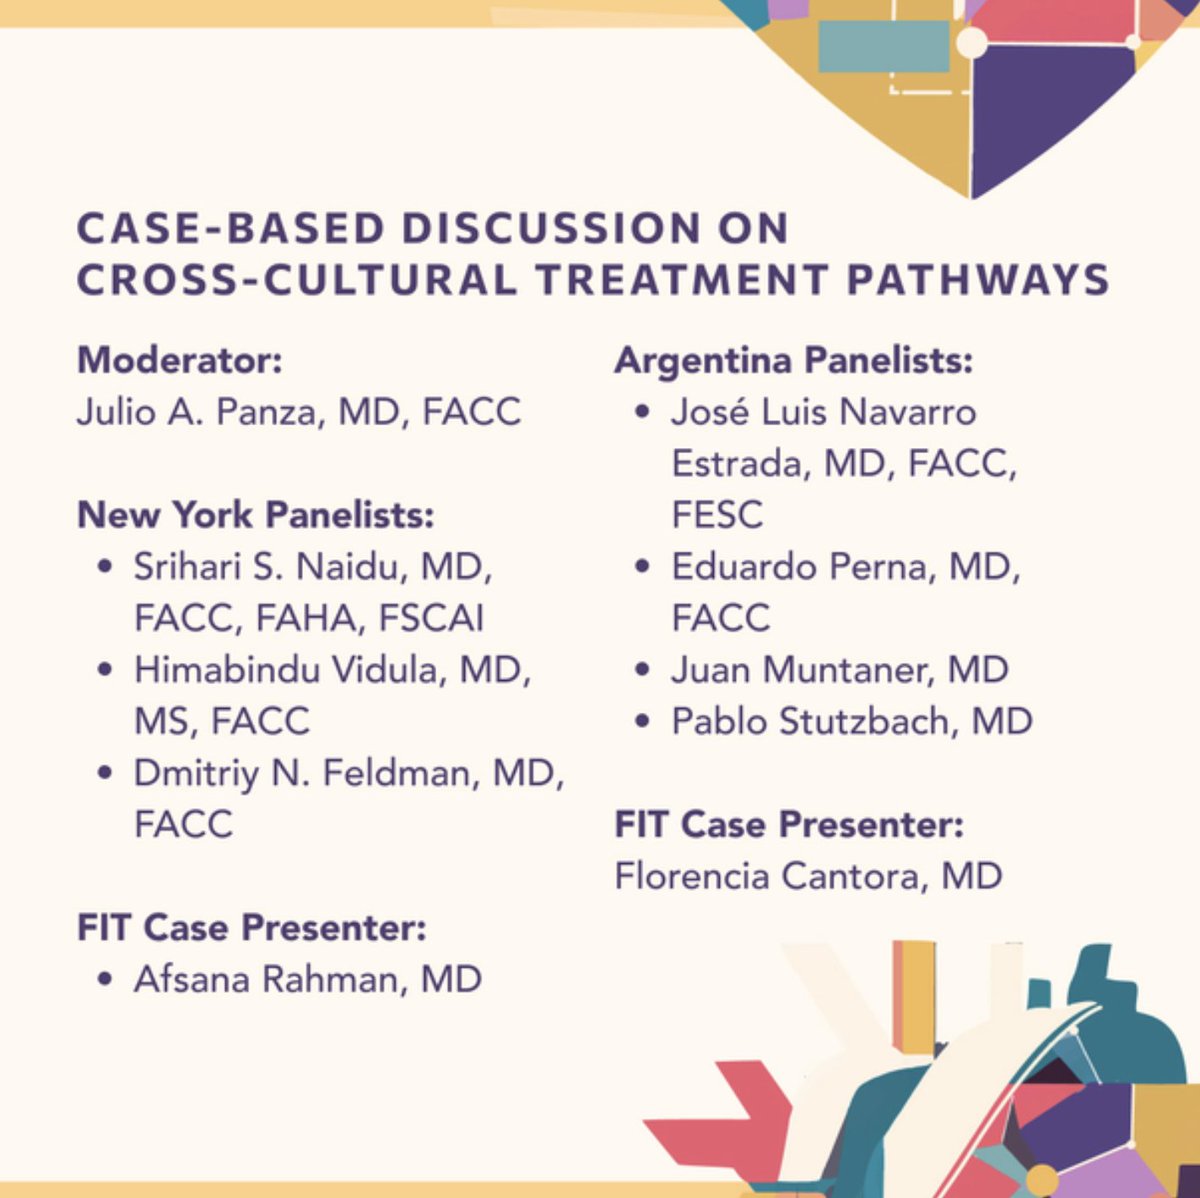 SAVE THE DATE for the first-ever joint seminar between the New York Chapter of @ACCinTouch (@NYSCACC) and the Argentina Chapter/#ACCARG (@SAC_54 & @ComunidadFAC) on 'cross-cultural treatment pathways'! 🇺🇸🇦🇷 We have a great lineup of panelists, @jlnavarro72 @EduardoPerna1…